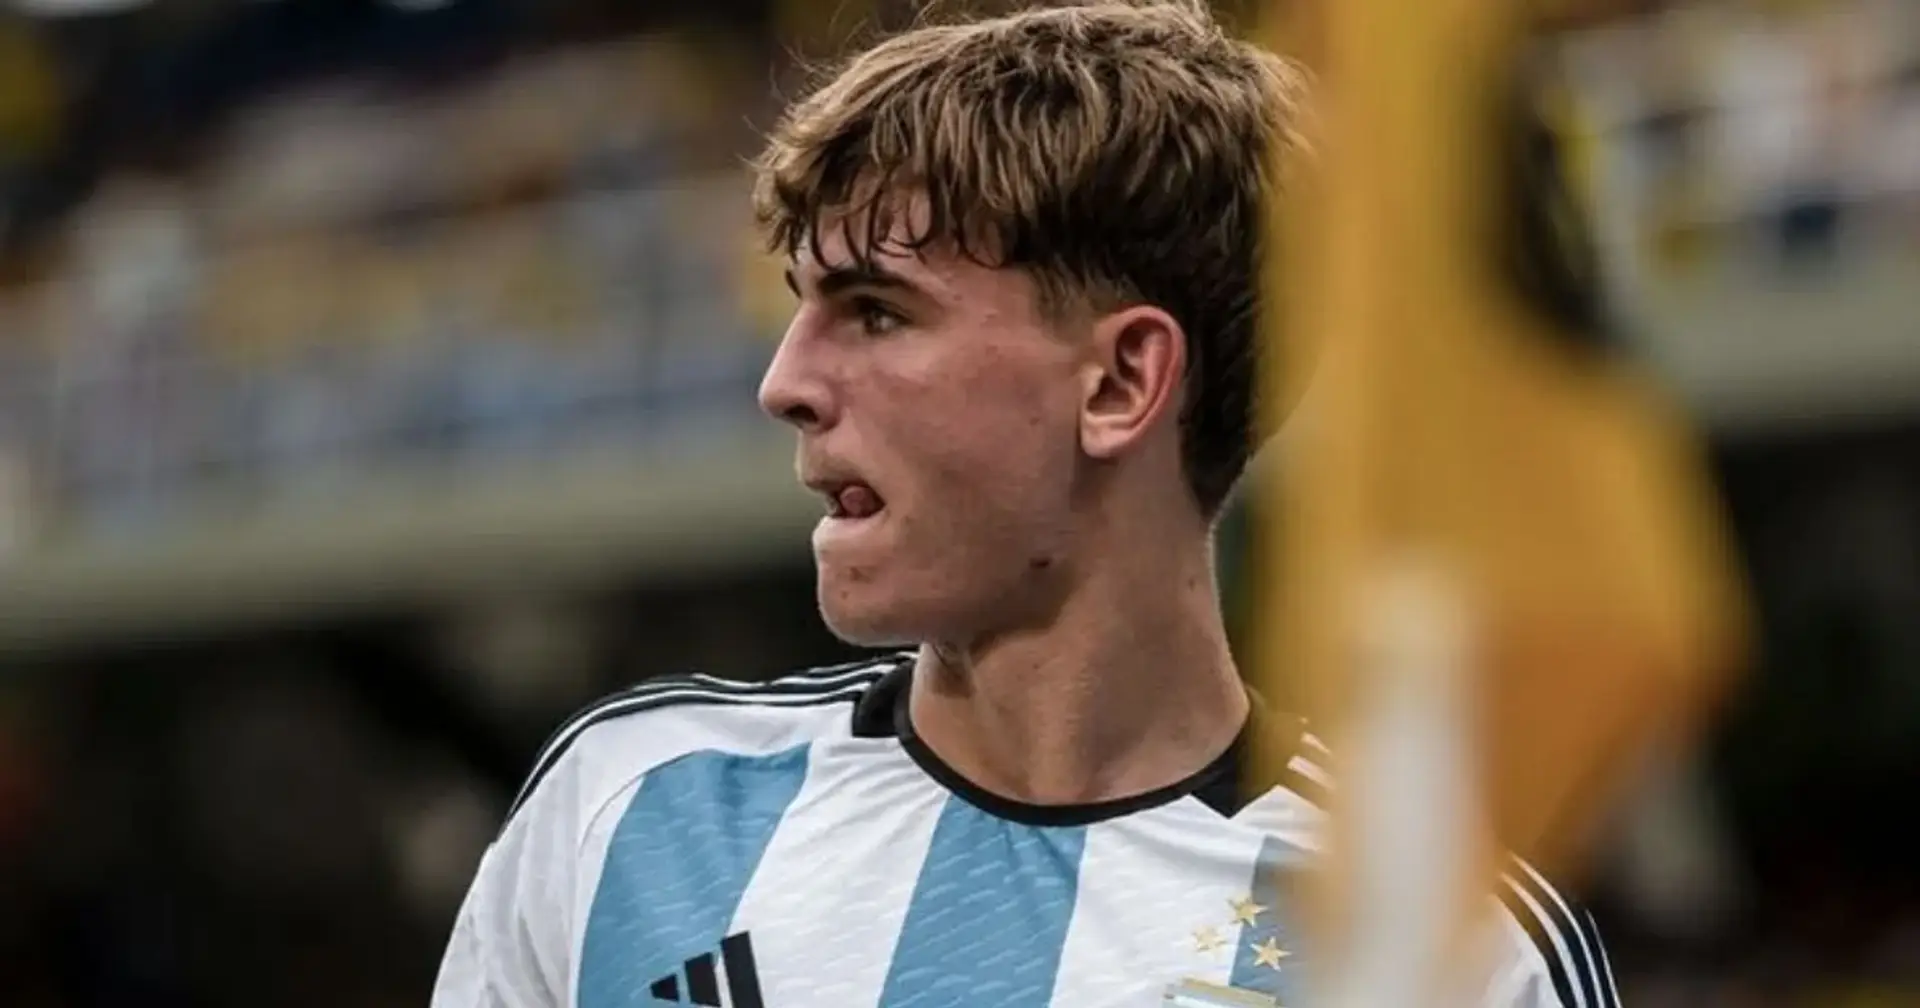 Why Nico Paz plays for Argentina despite being born in Spain